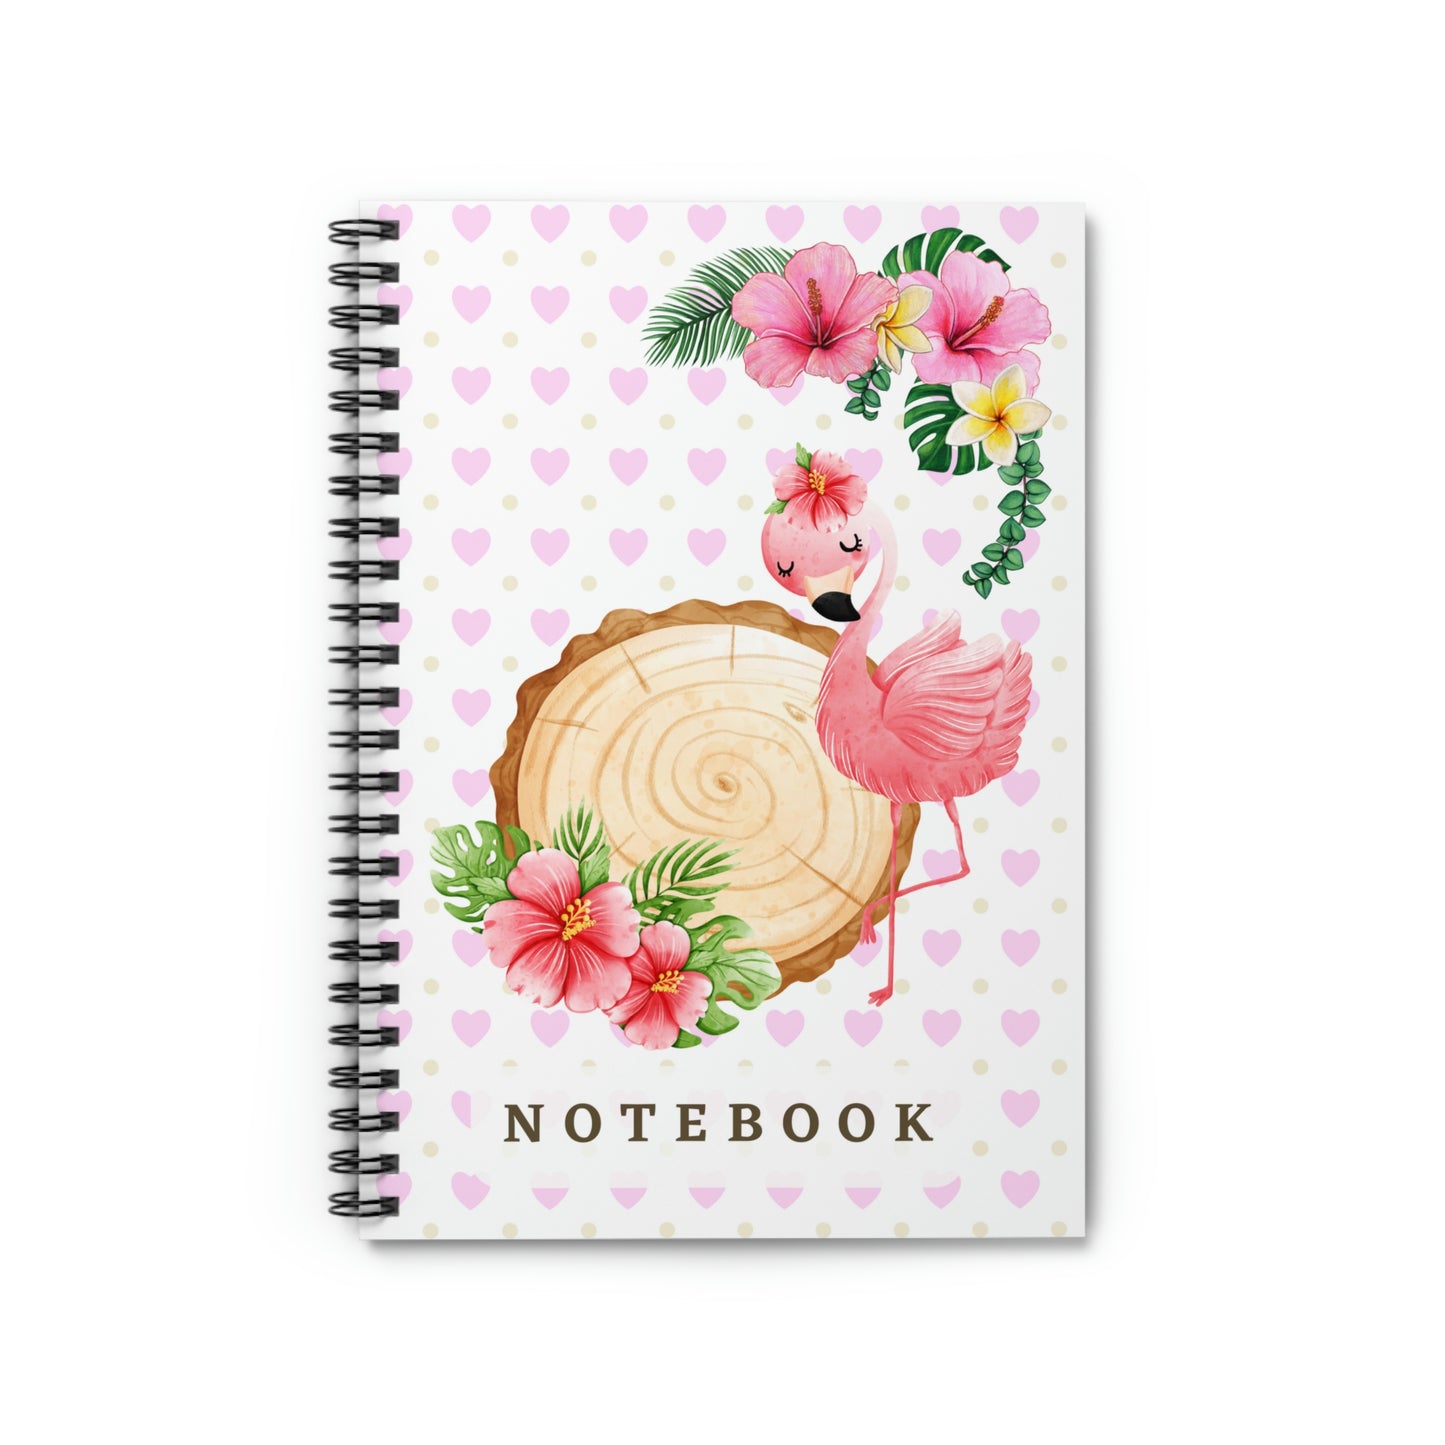 Flamingo with Hibiscus design Spiral Notebook - Ruled Line 118 pages